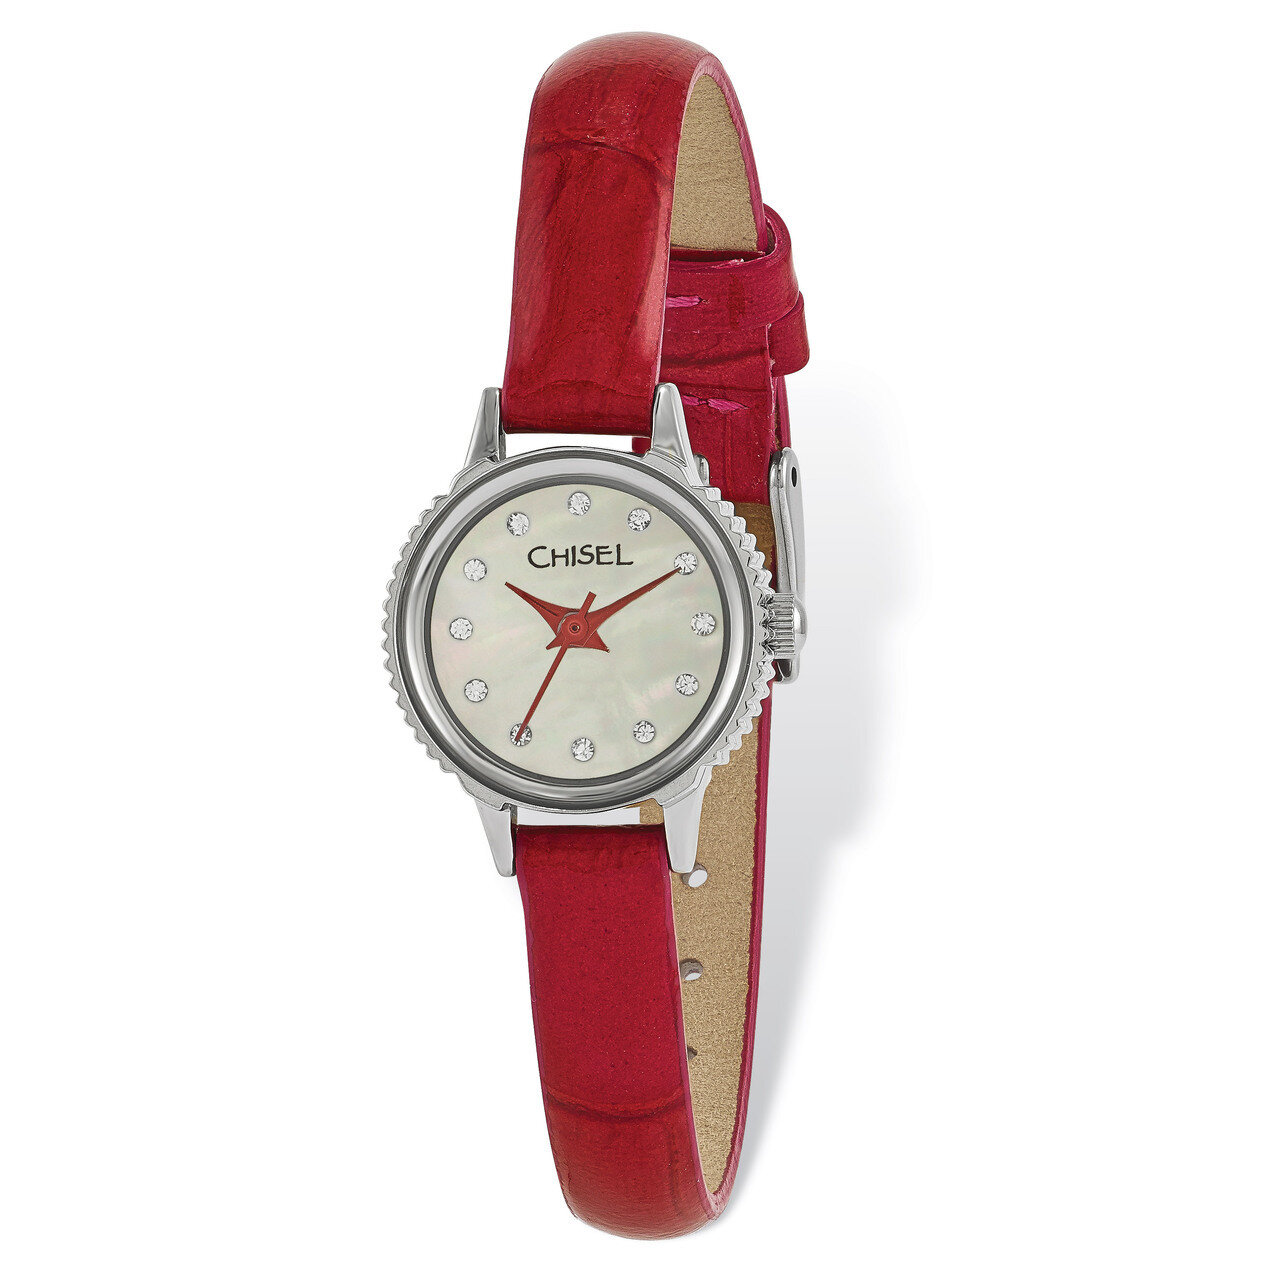 Chisel Stainless Steel Red Leather Watch Strap Ladies TPW93